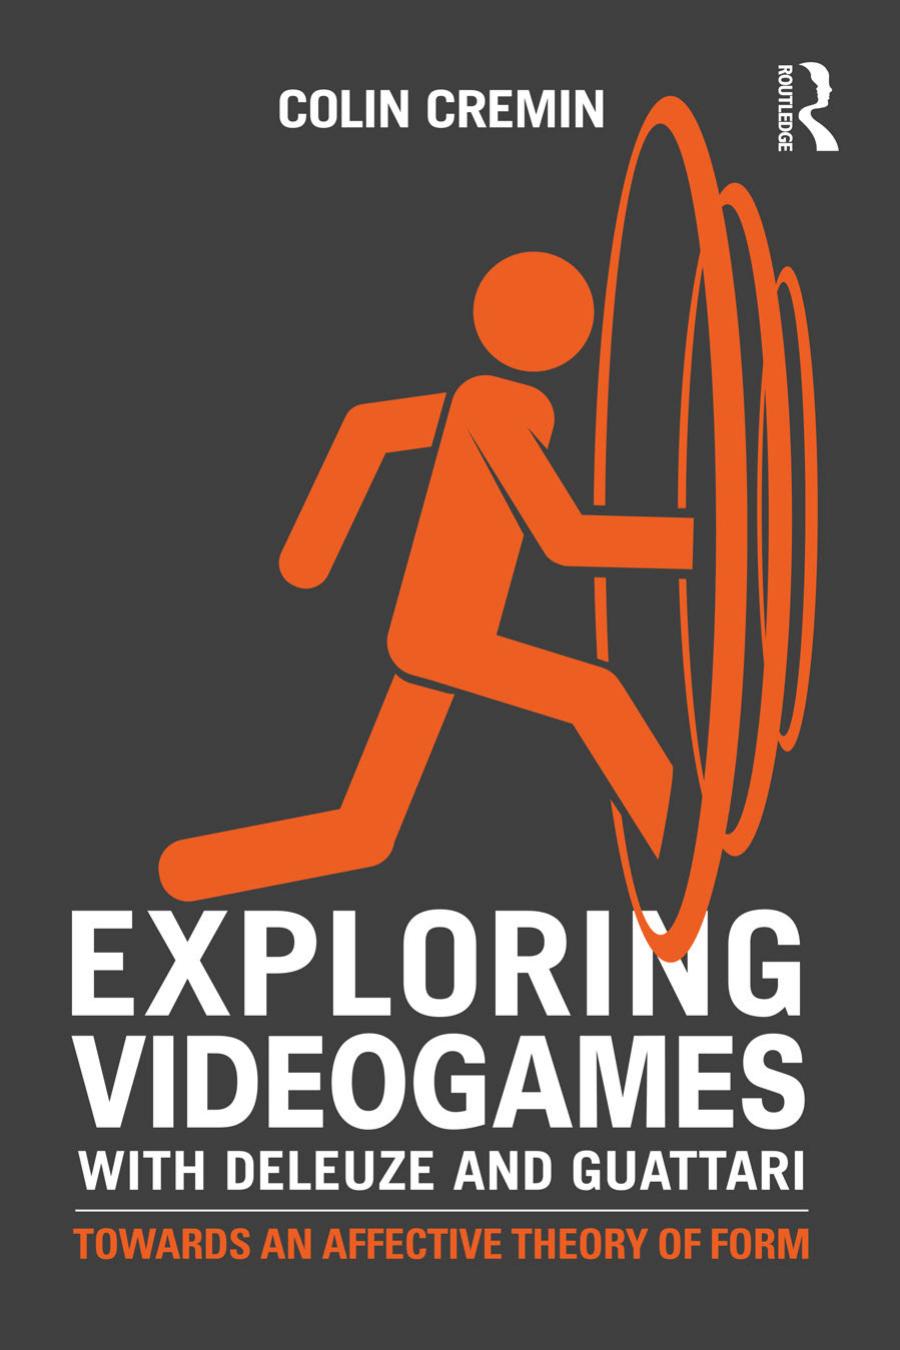 Exploring Videogames with Deleuze and Guattari (2015, Taylor & Francis Group)